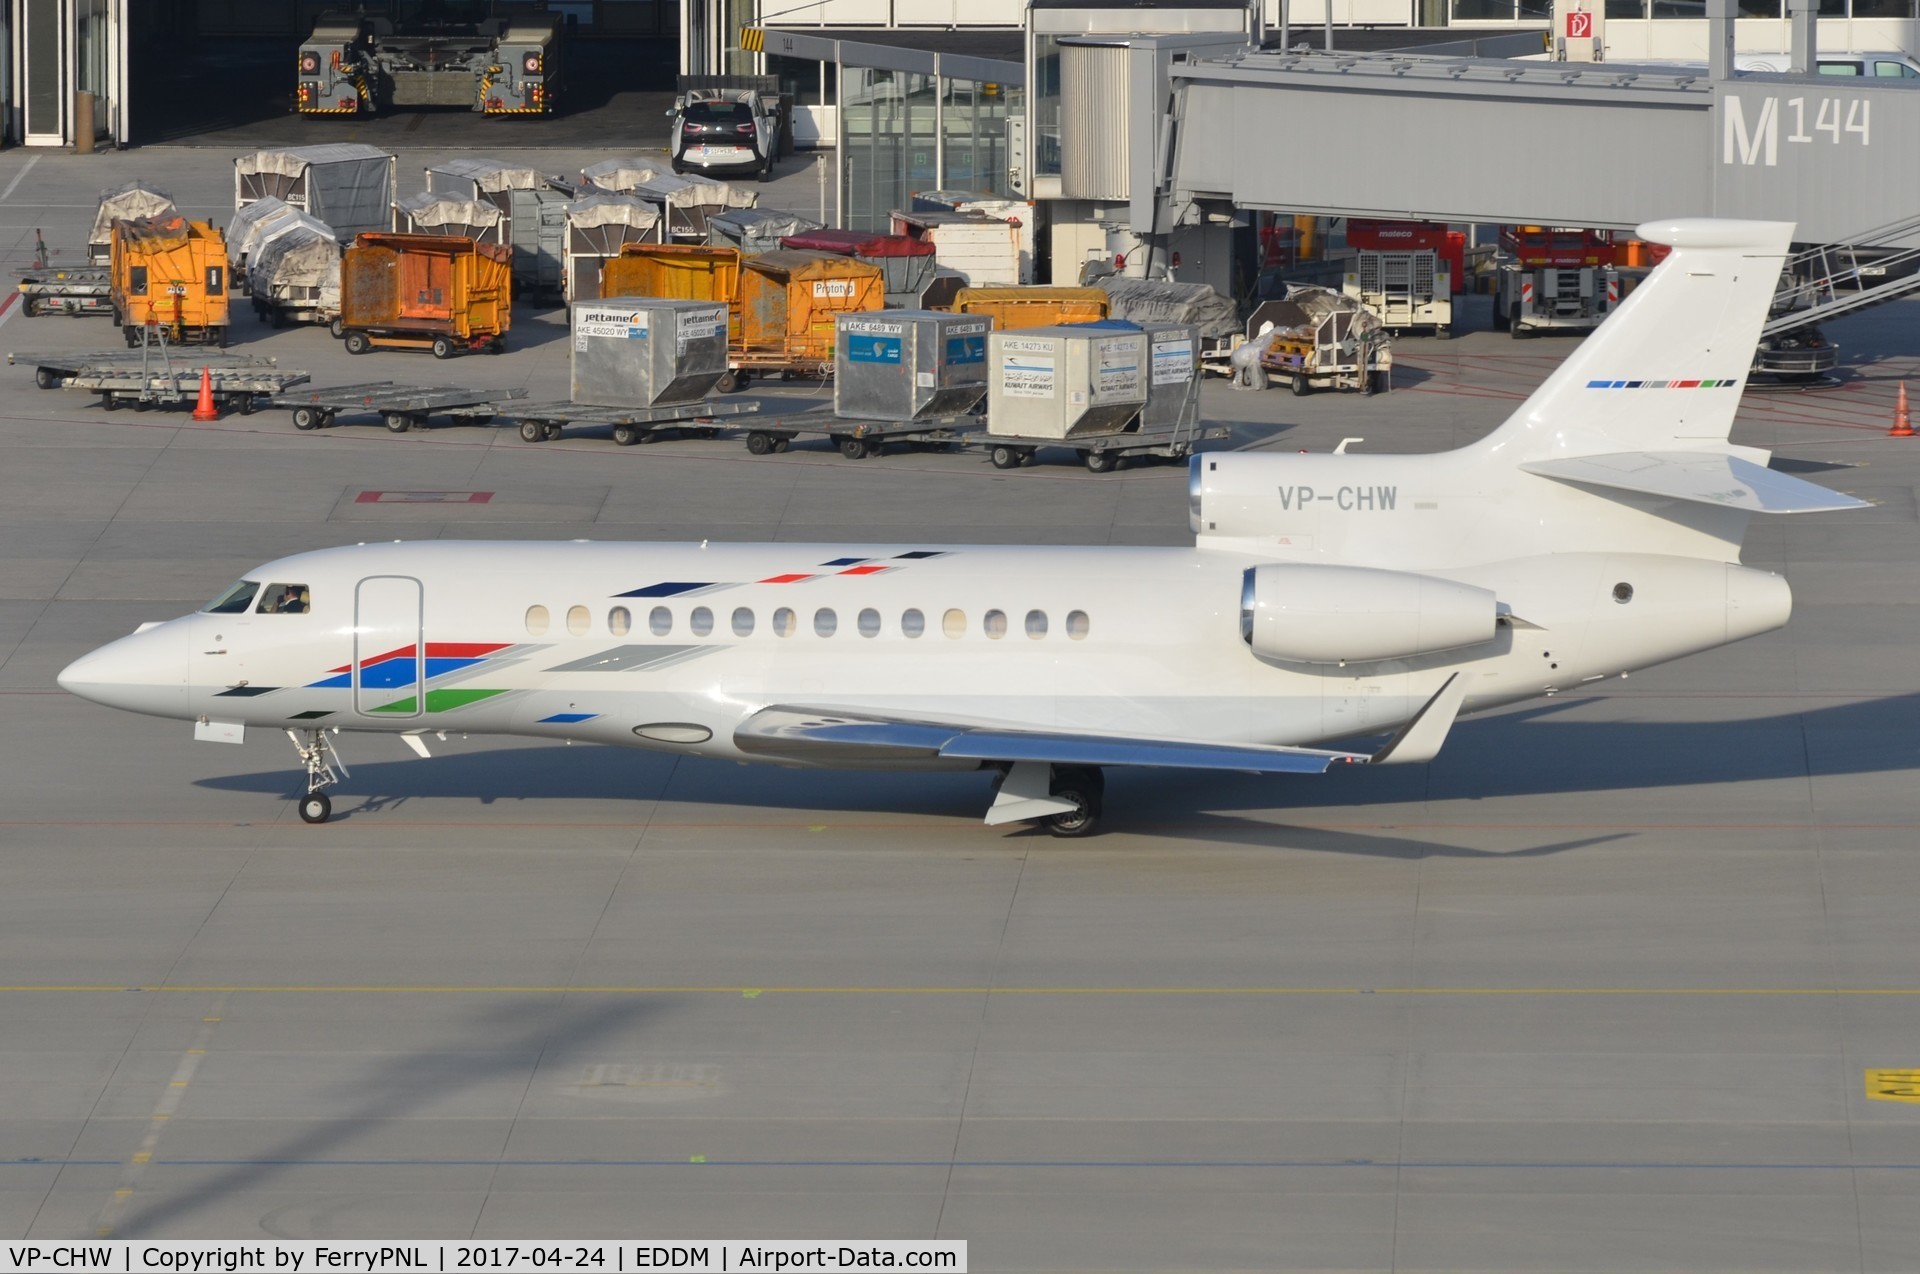 VP-CHW, 2016 Dassault Falcon 7X C/N 270, New addition in 2016 to the VW family: DA7X